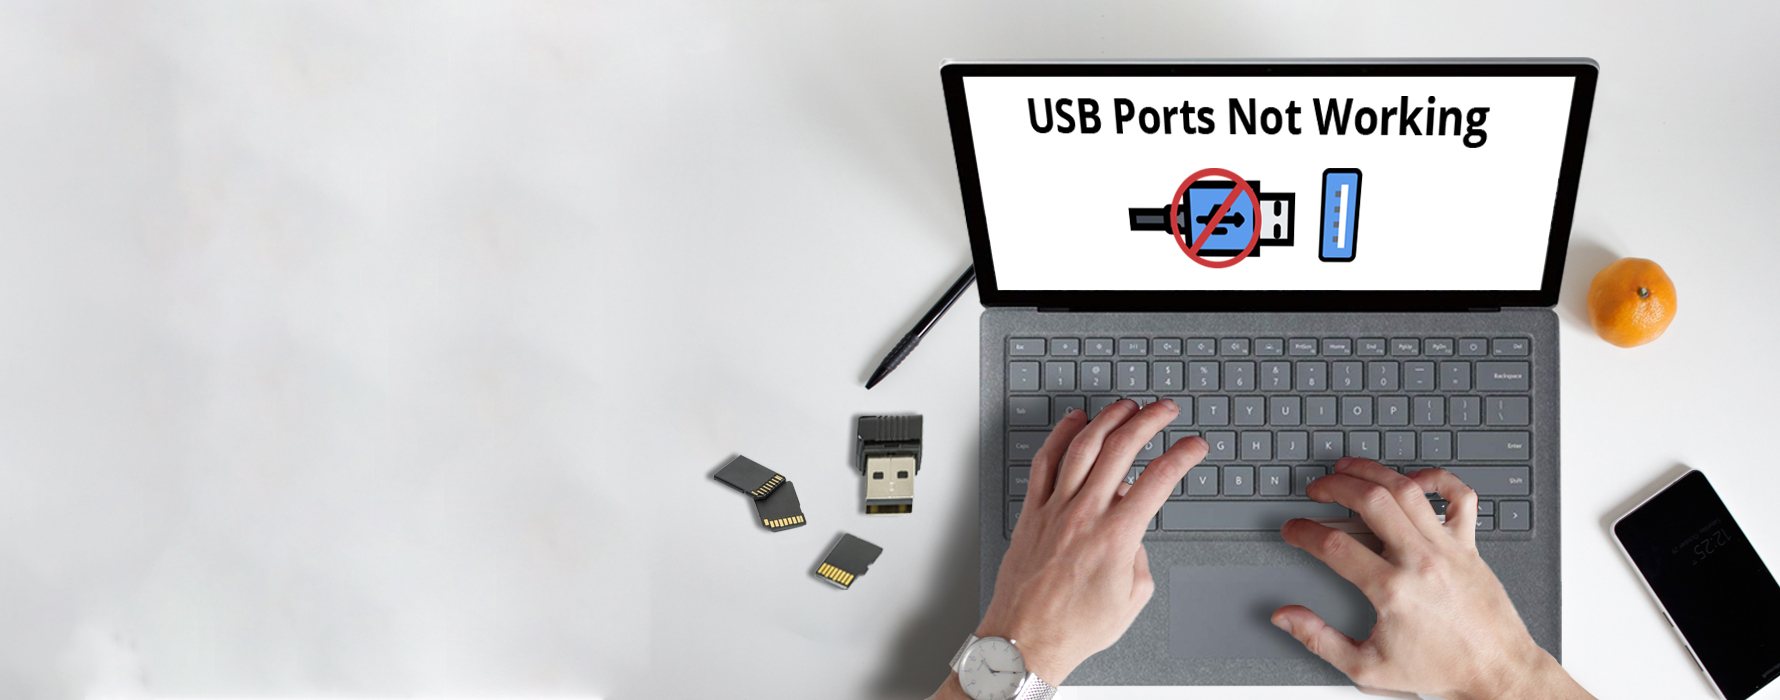 How To Fix USB Ports Not Working On A Laptop